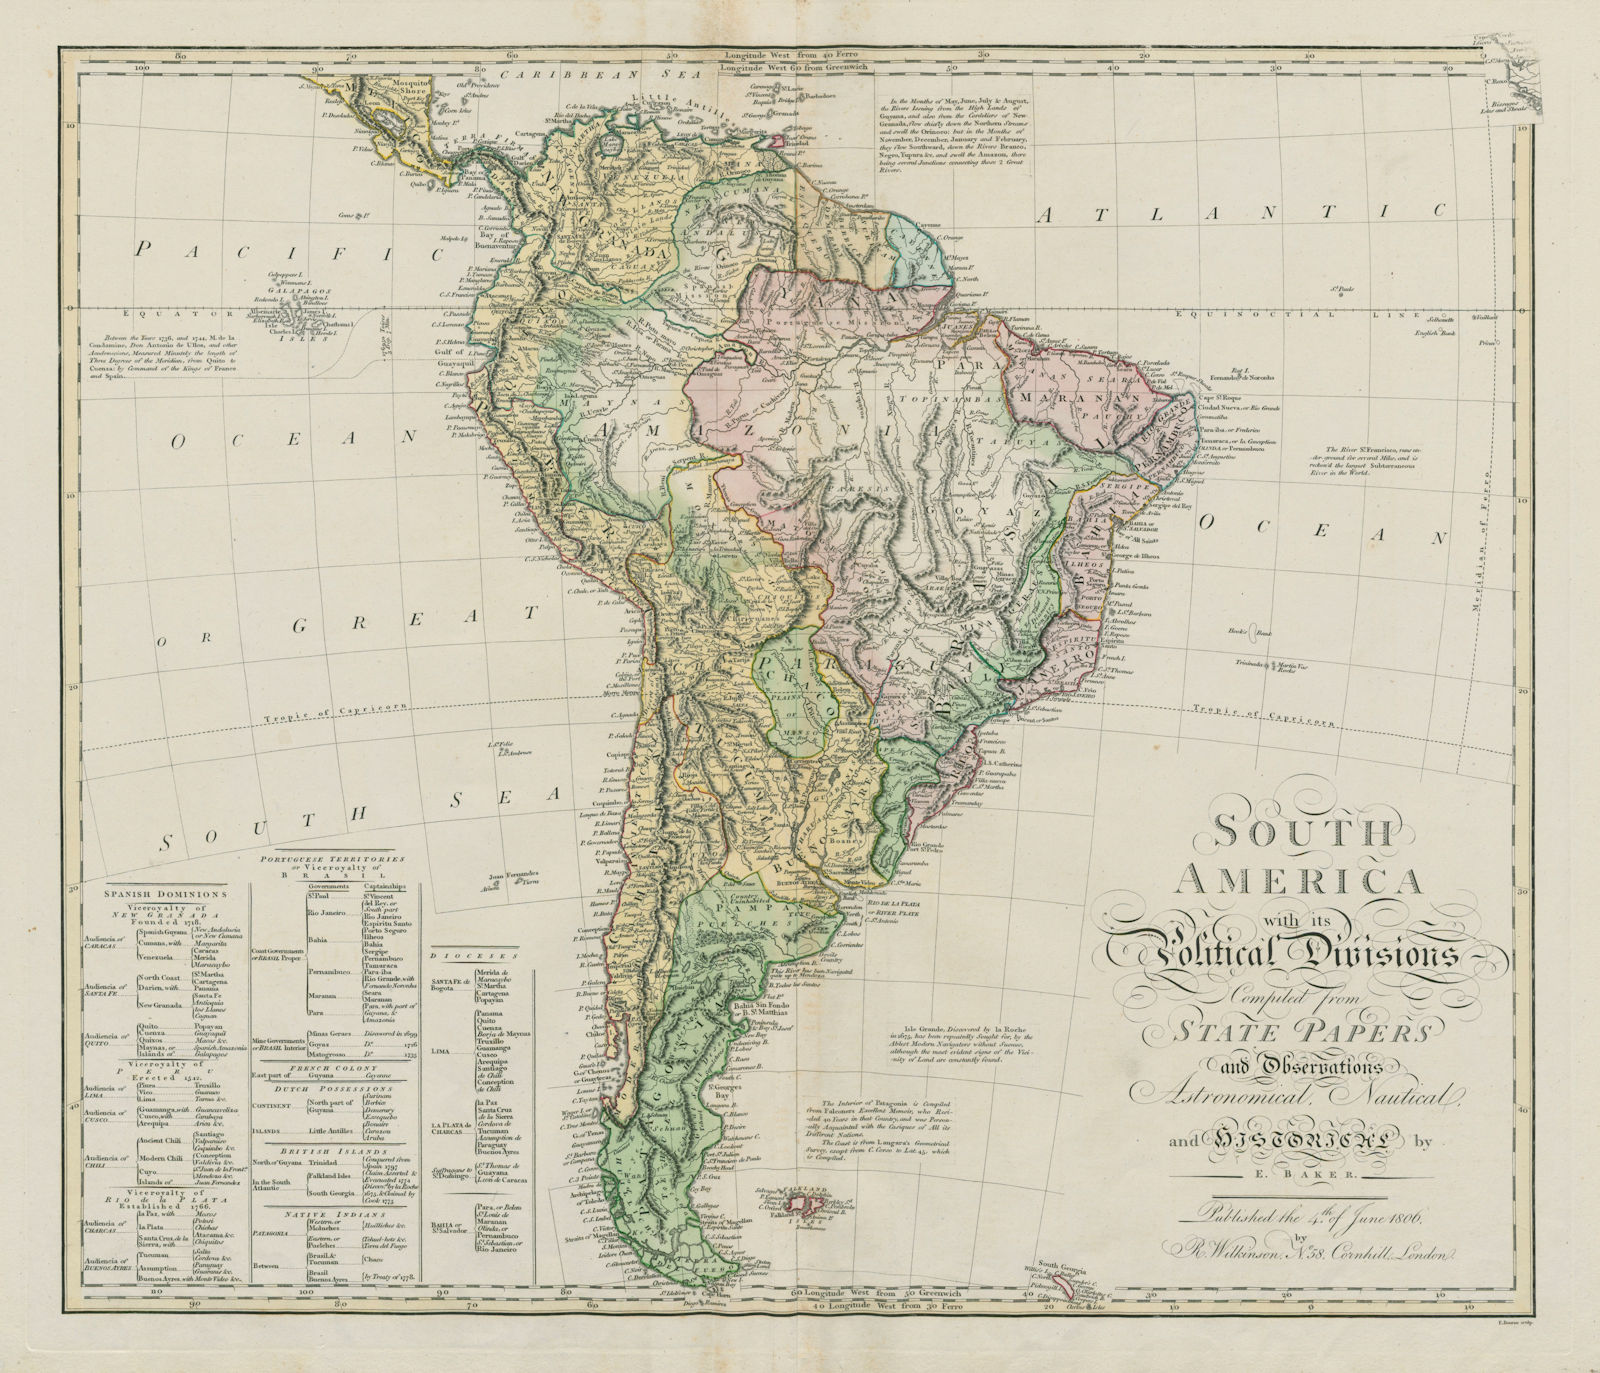 Associate Product South America with its Political Divisions. BAKER / BOURNE 1806 old map